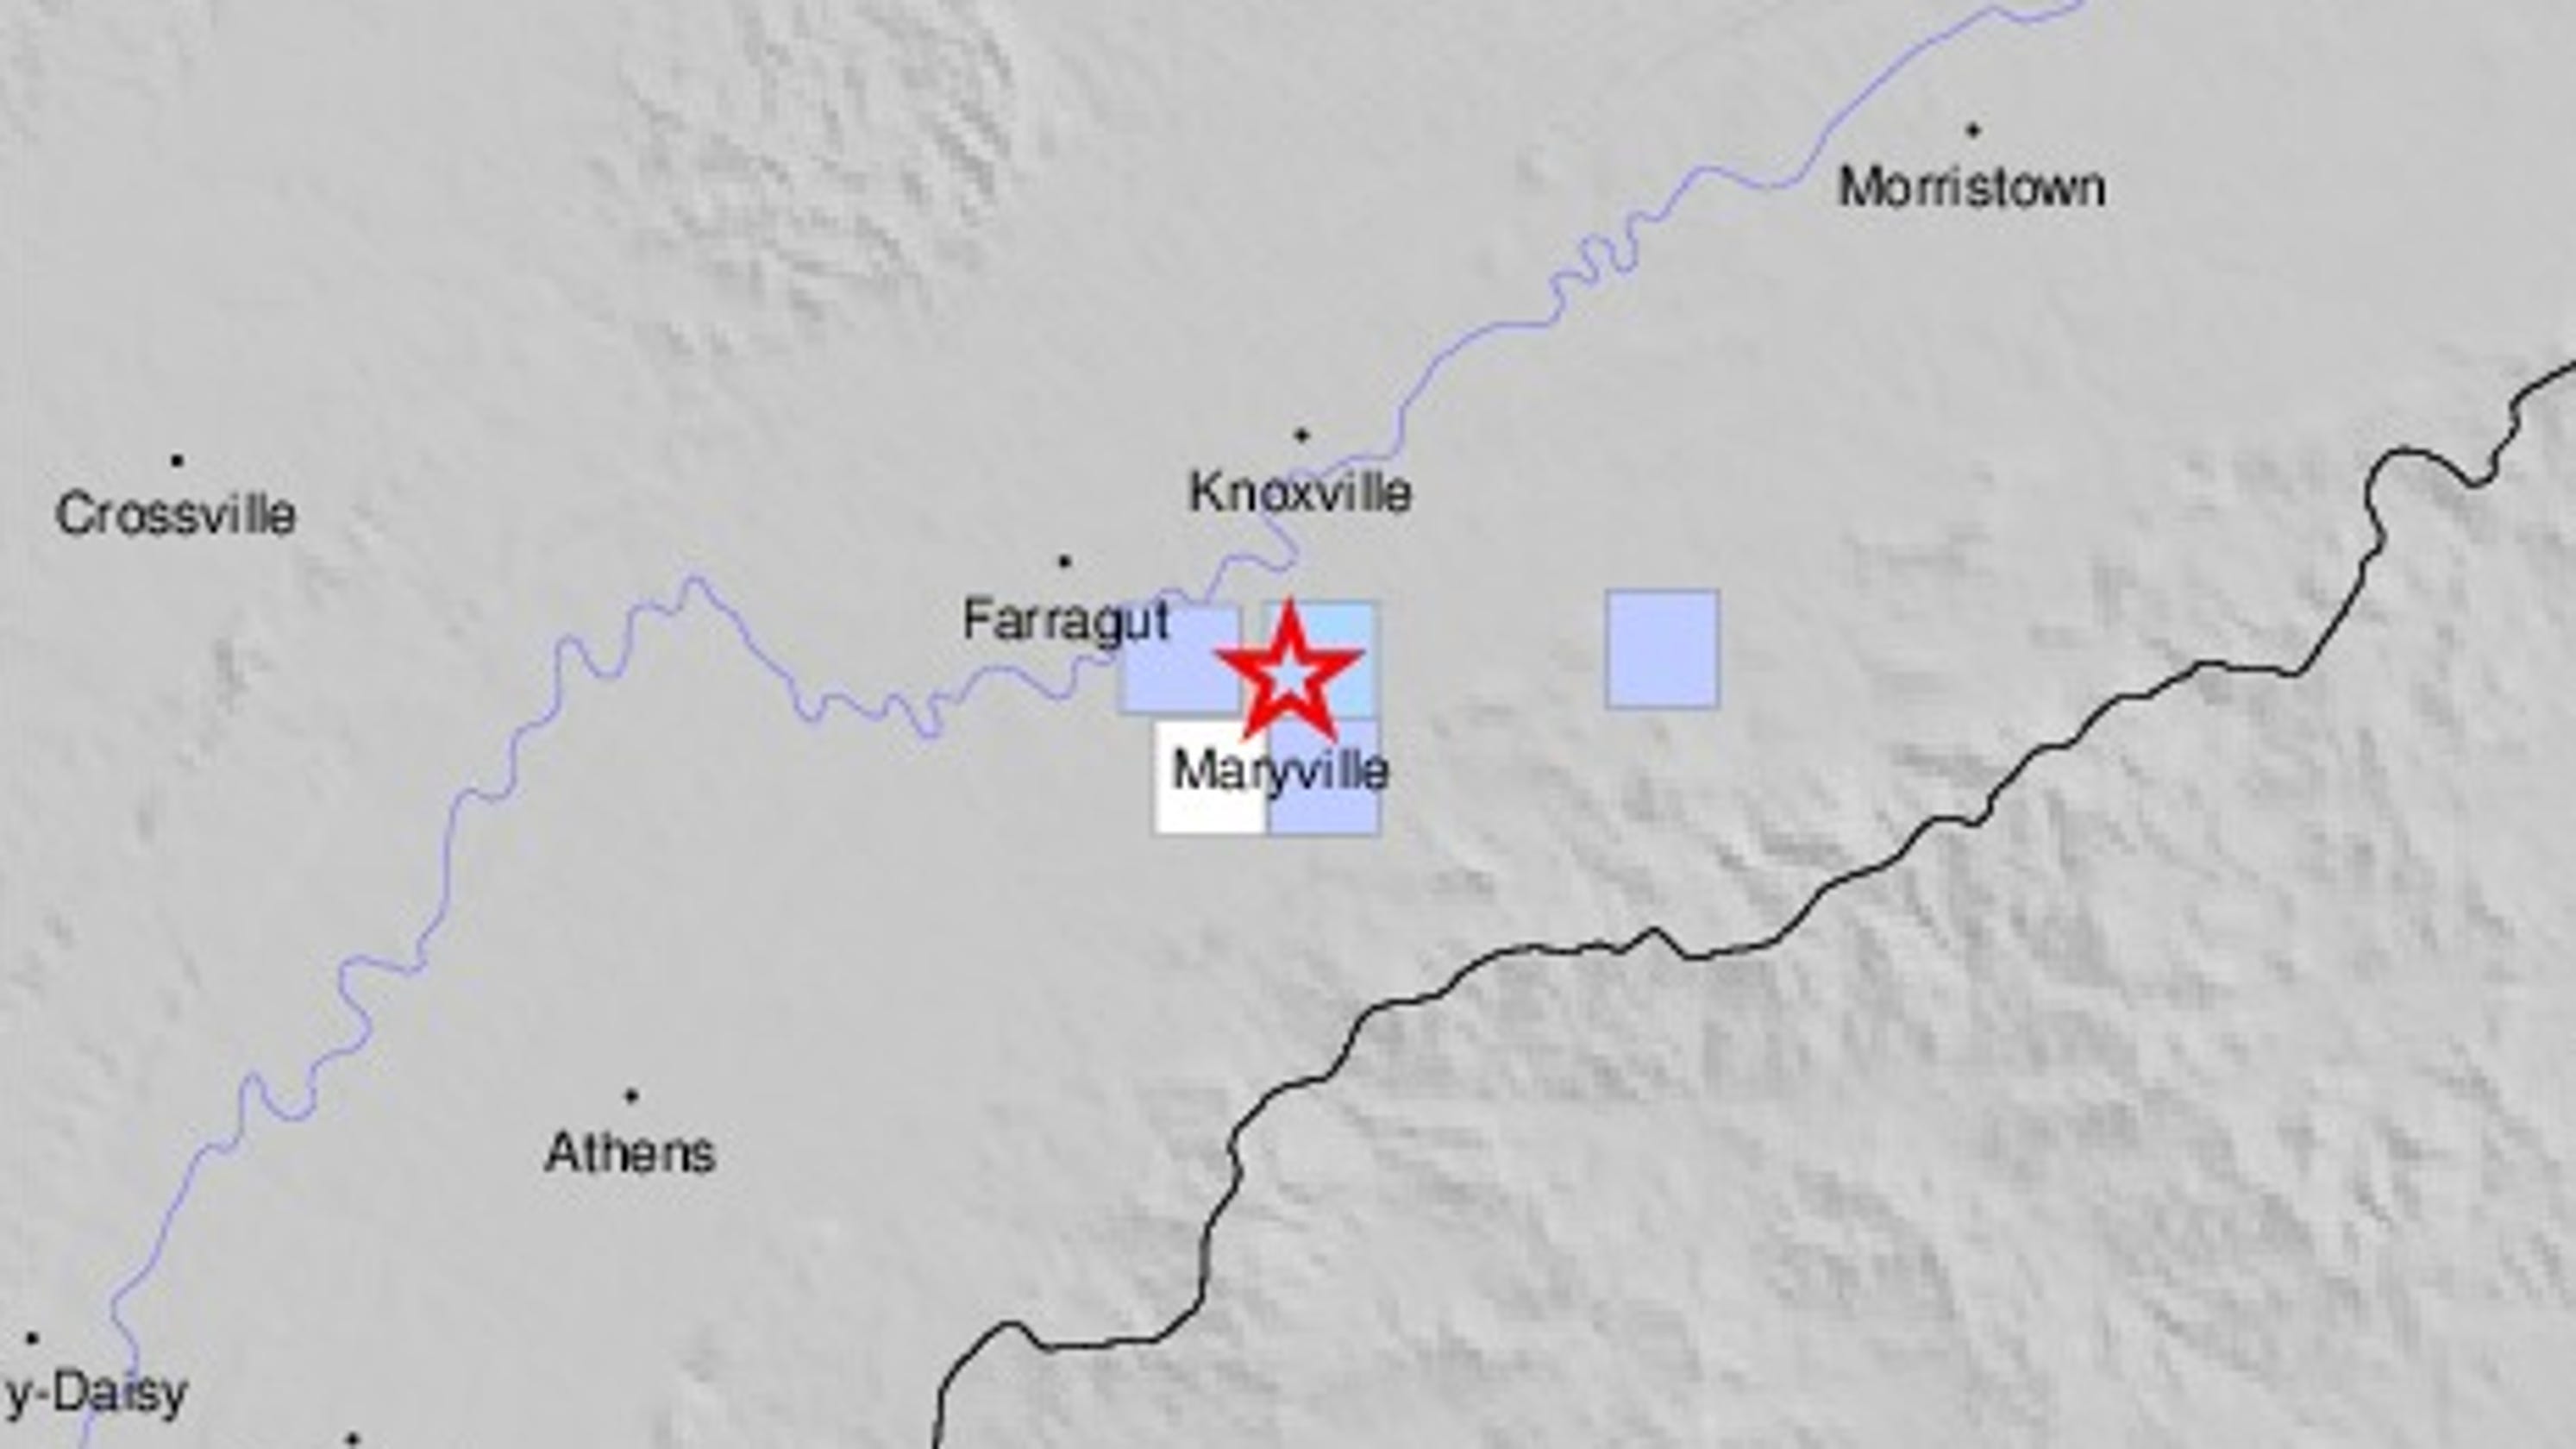 East Tennessee earthquake hits 12 miles from Knoxville2987 x 1680